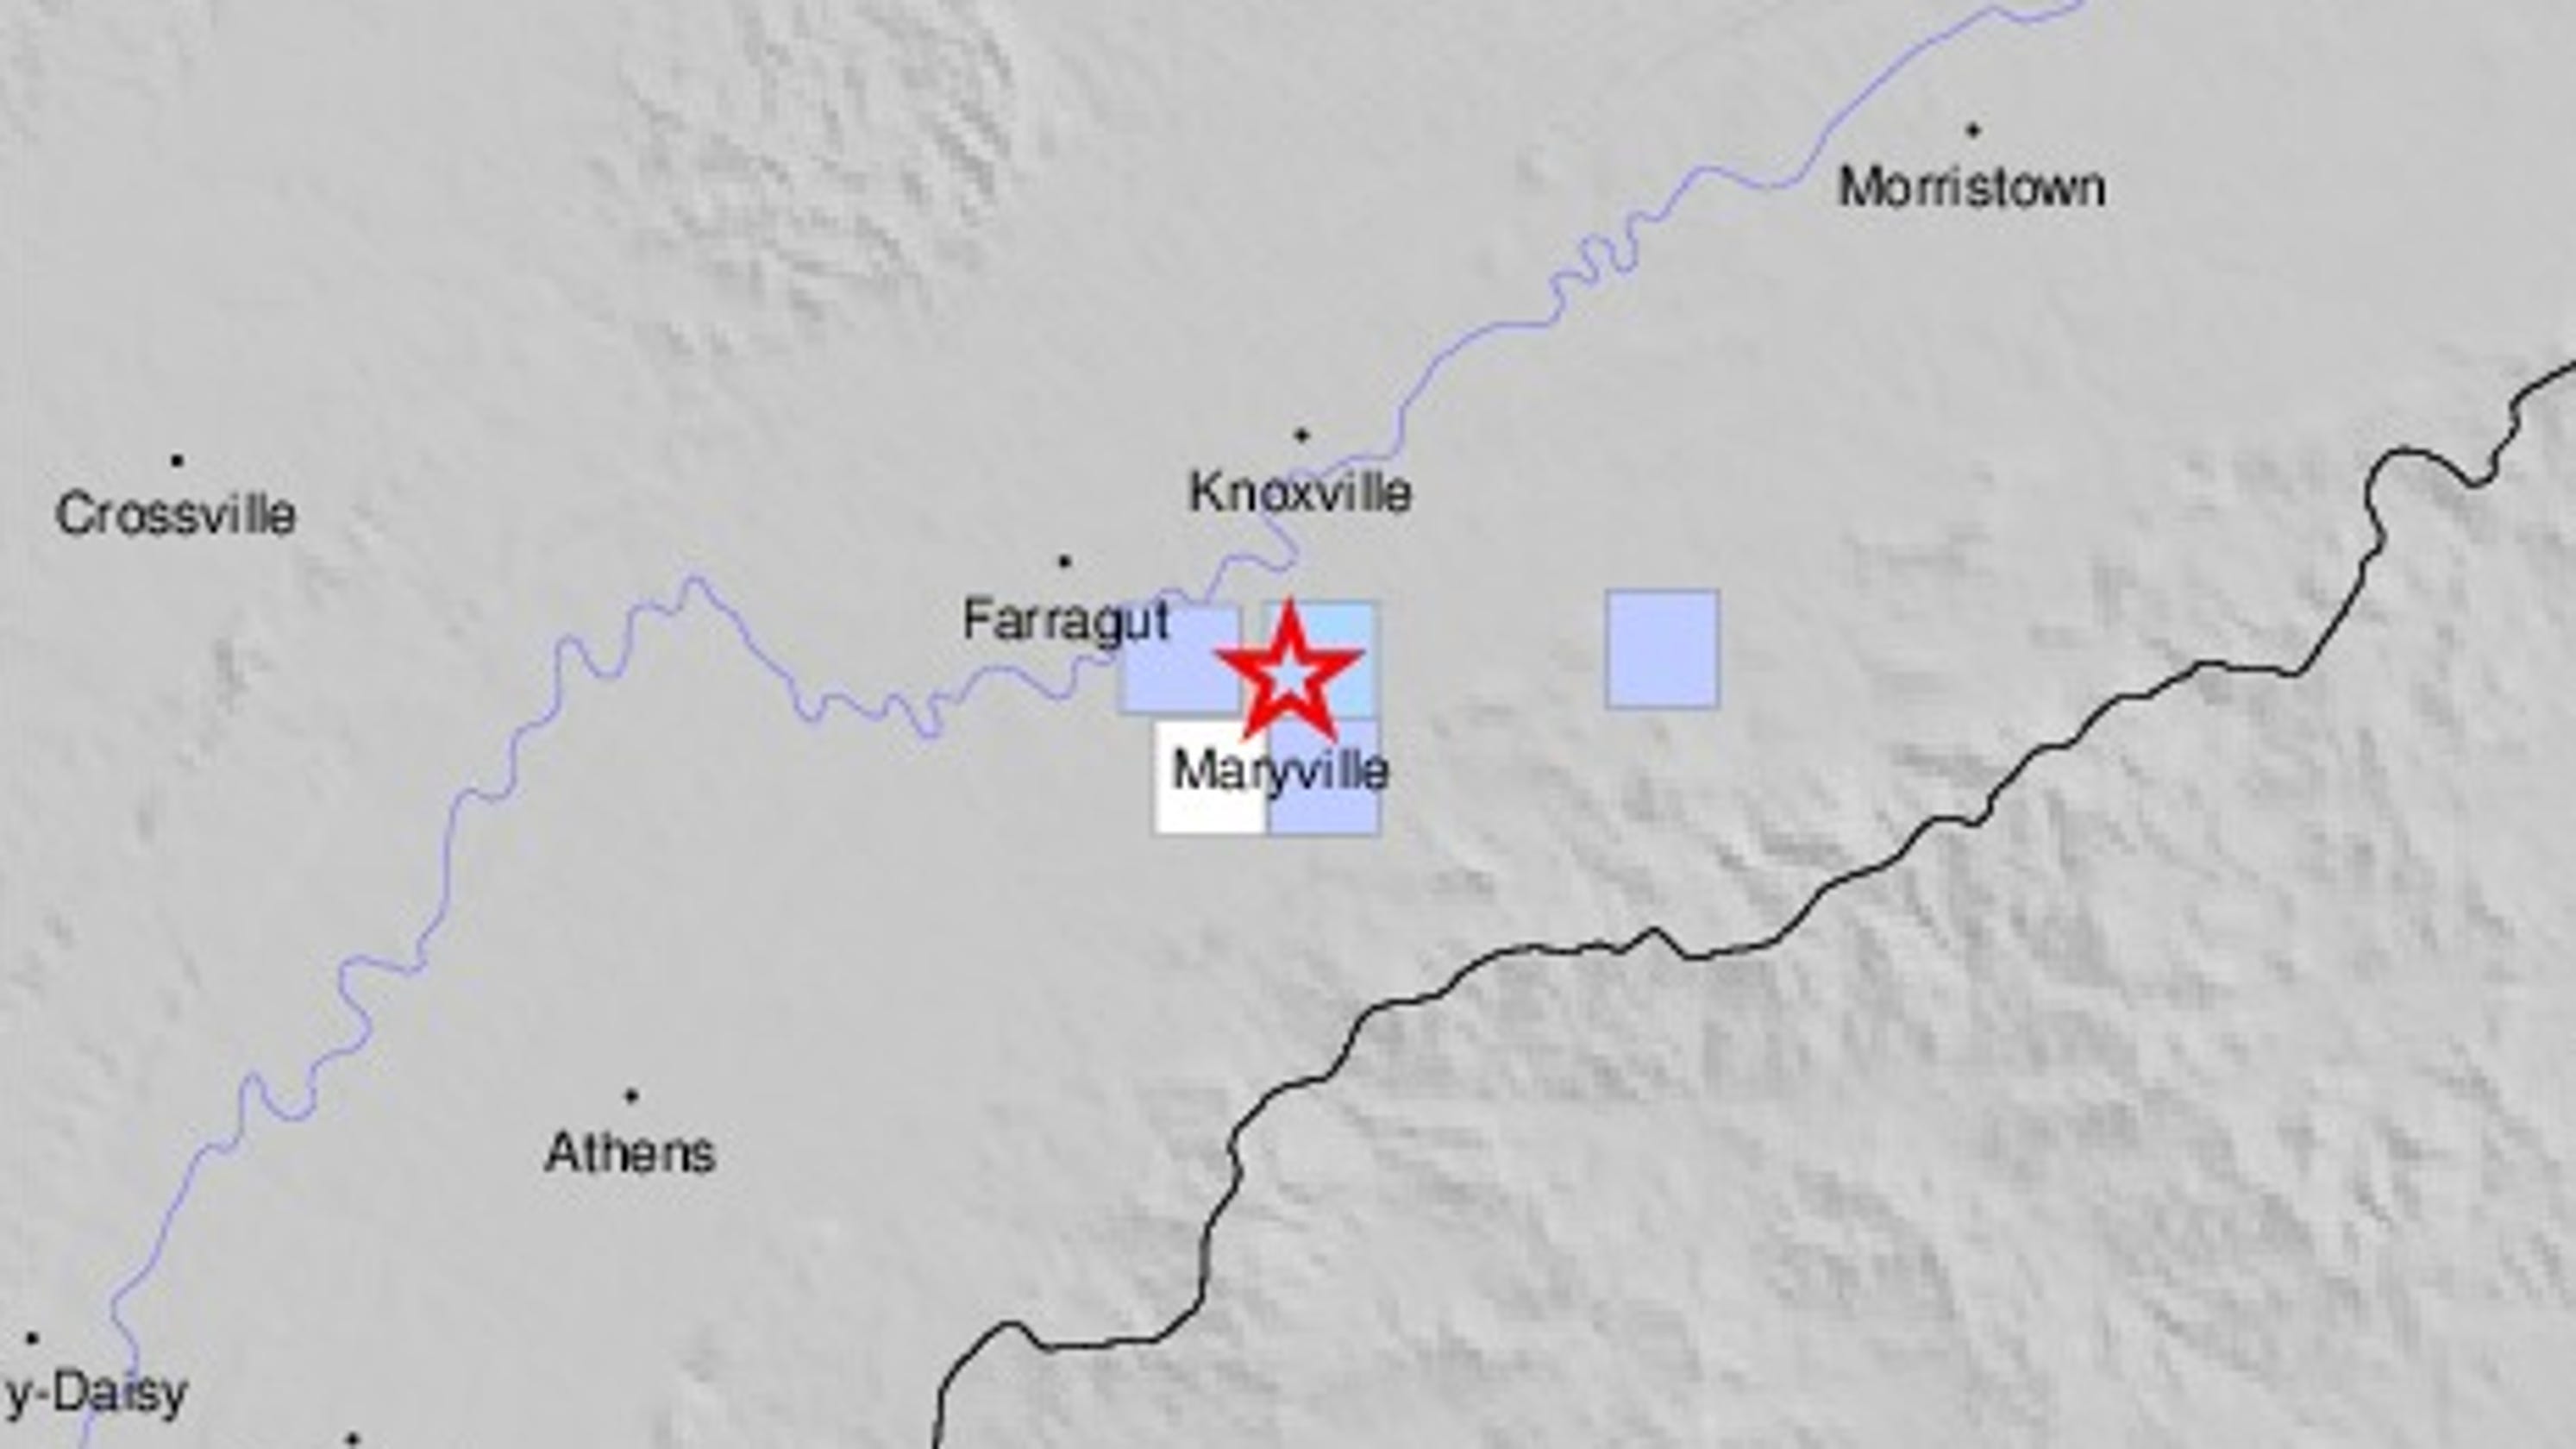 East Tennessee earthquake hits 12 miles from Knoxville2987 x 1680